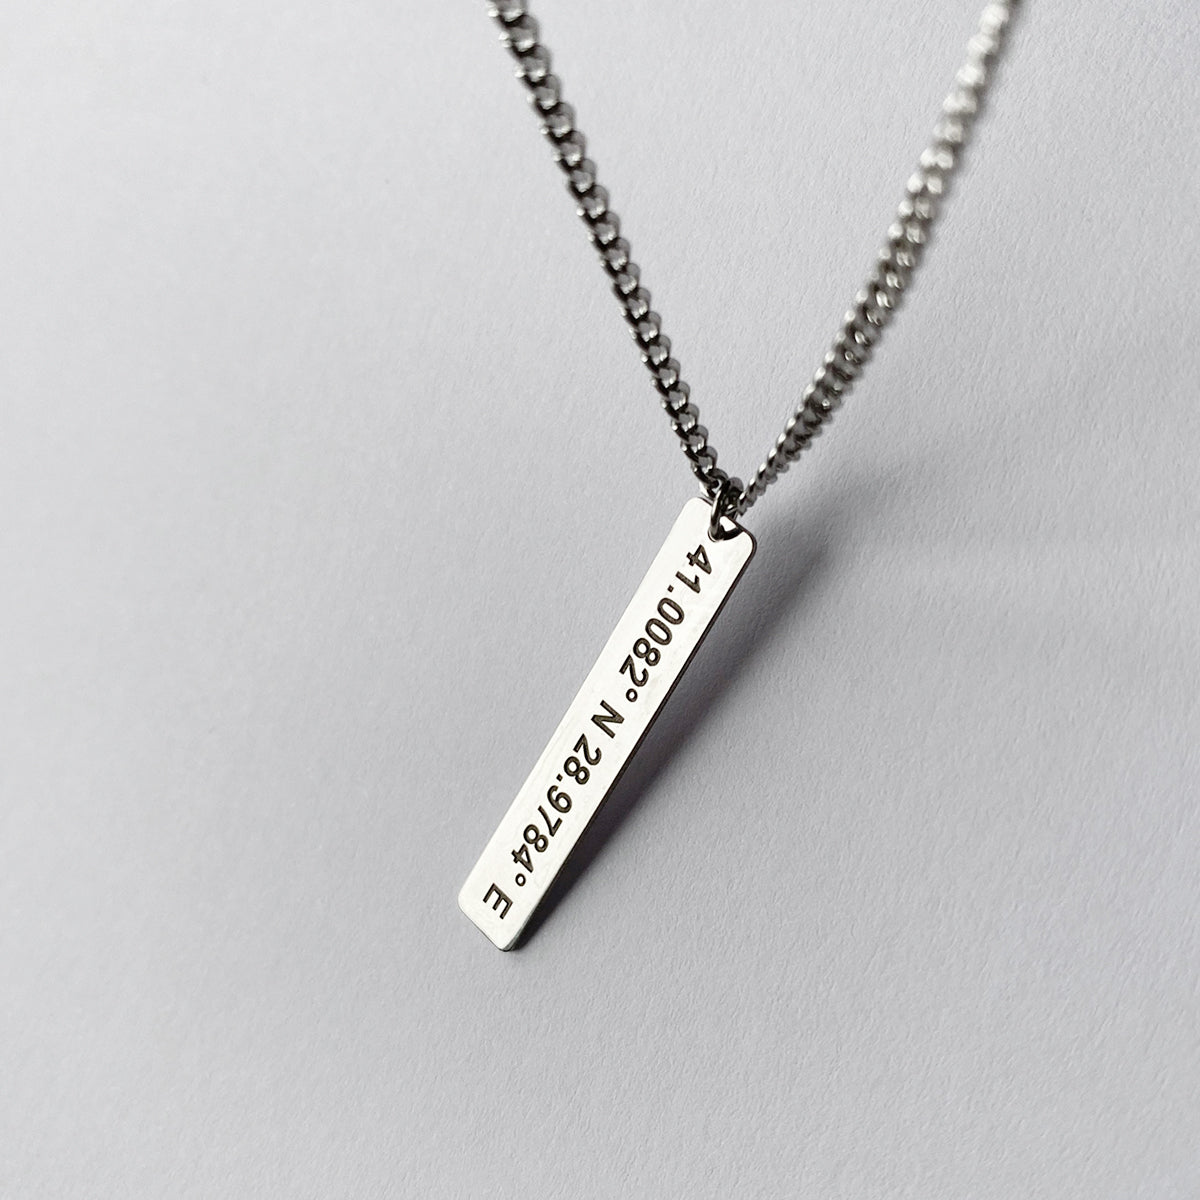 Detroit GPS Coordinates Necklace, Laser Engraved Stainless Steel – Well  Done Goods, by Cyberoptix